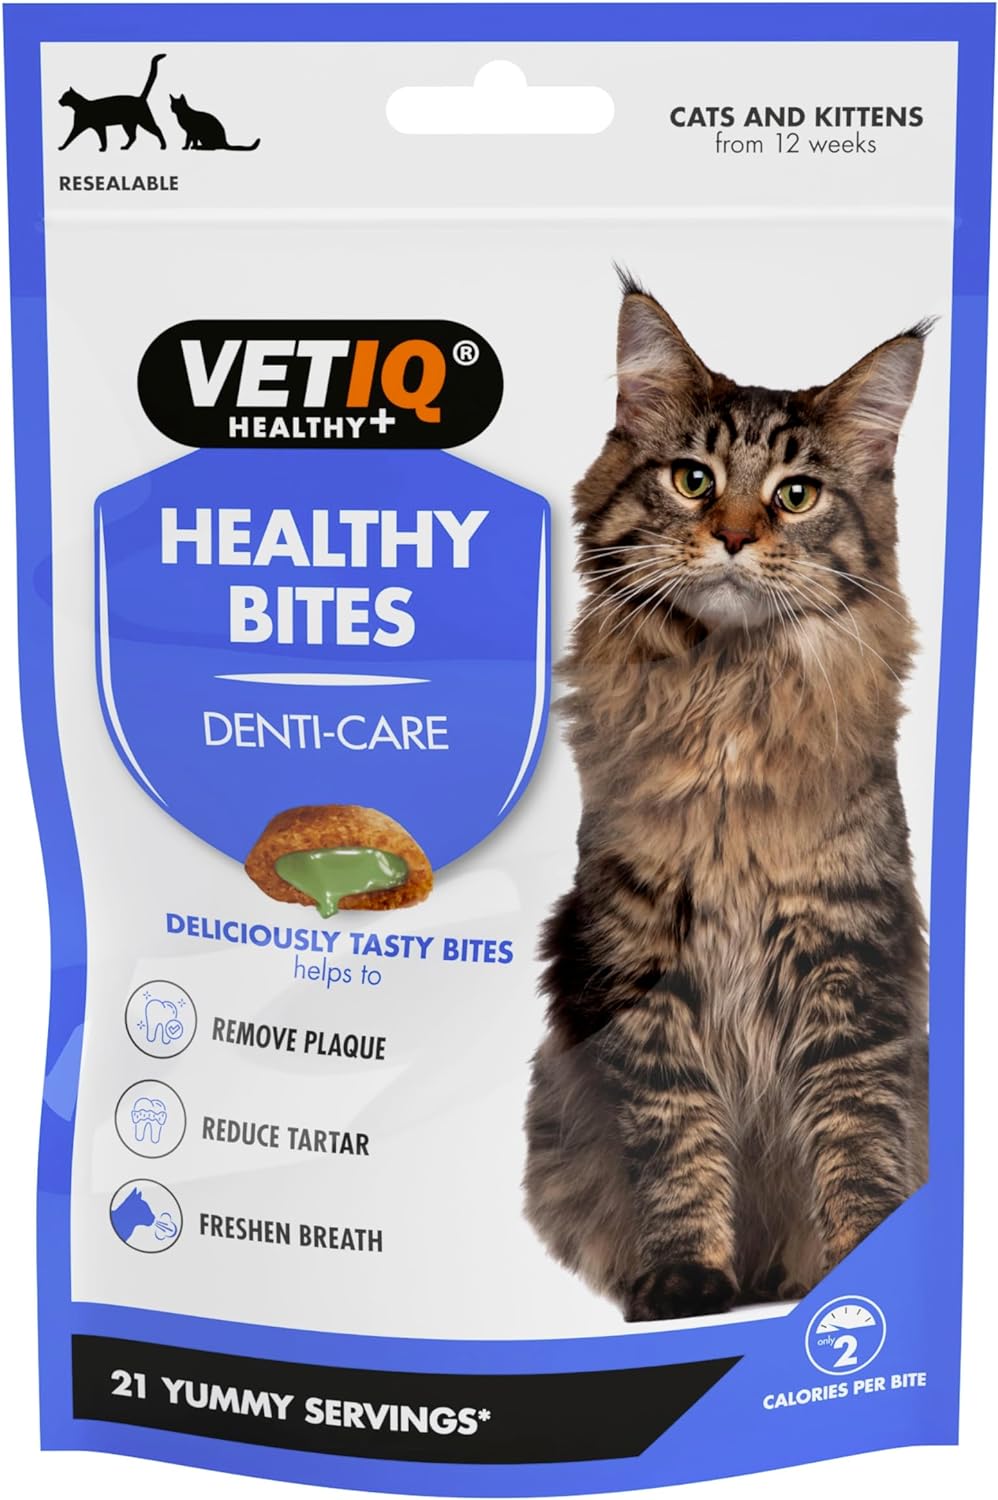 VETIQ Healthy Bites Denti-Care Treats For Cats & Kittens, Helps to Prevent Plaque, Reduce Tartar Build Up & Contains Parsley Seed & Clove Leaf Oil for Fresh Breath, 65 g (Pack of 4)?EC5023